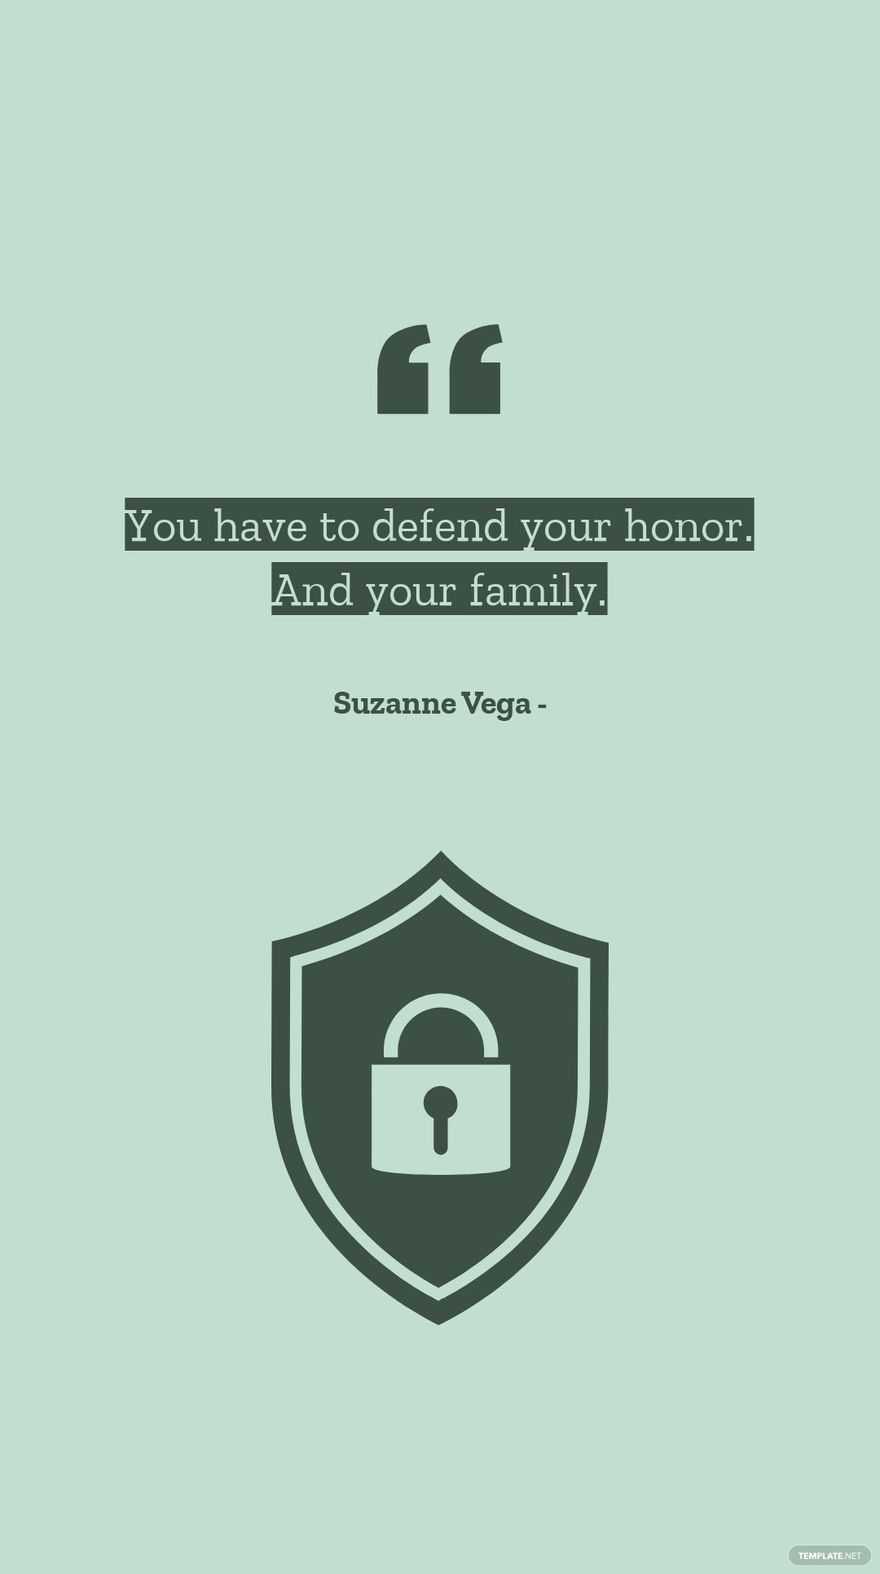 Suzanne Vega - You have to defend your honor. And your family. in JPG